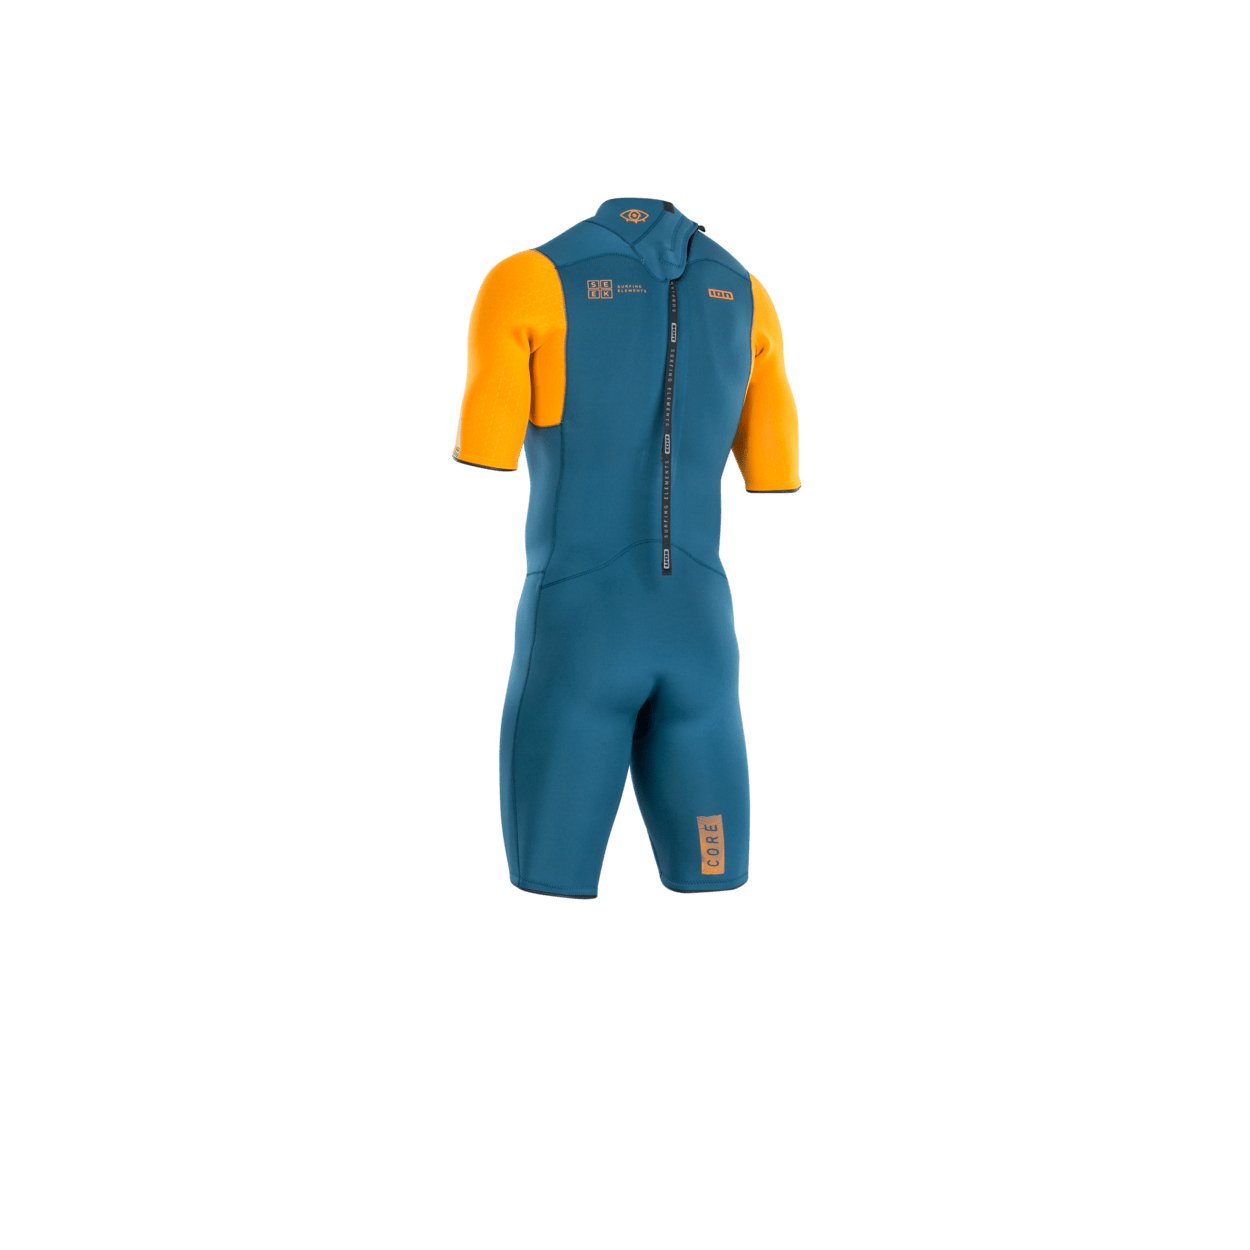 ION Seek Core 2/2 Shorty SS Back Zip 2022 - Worthing Watersports - 9010583055435 - Wetsuits - ION Water